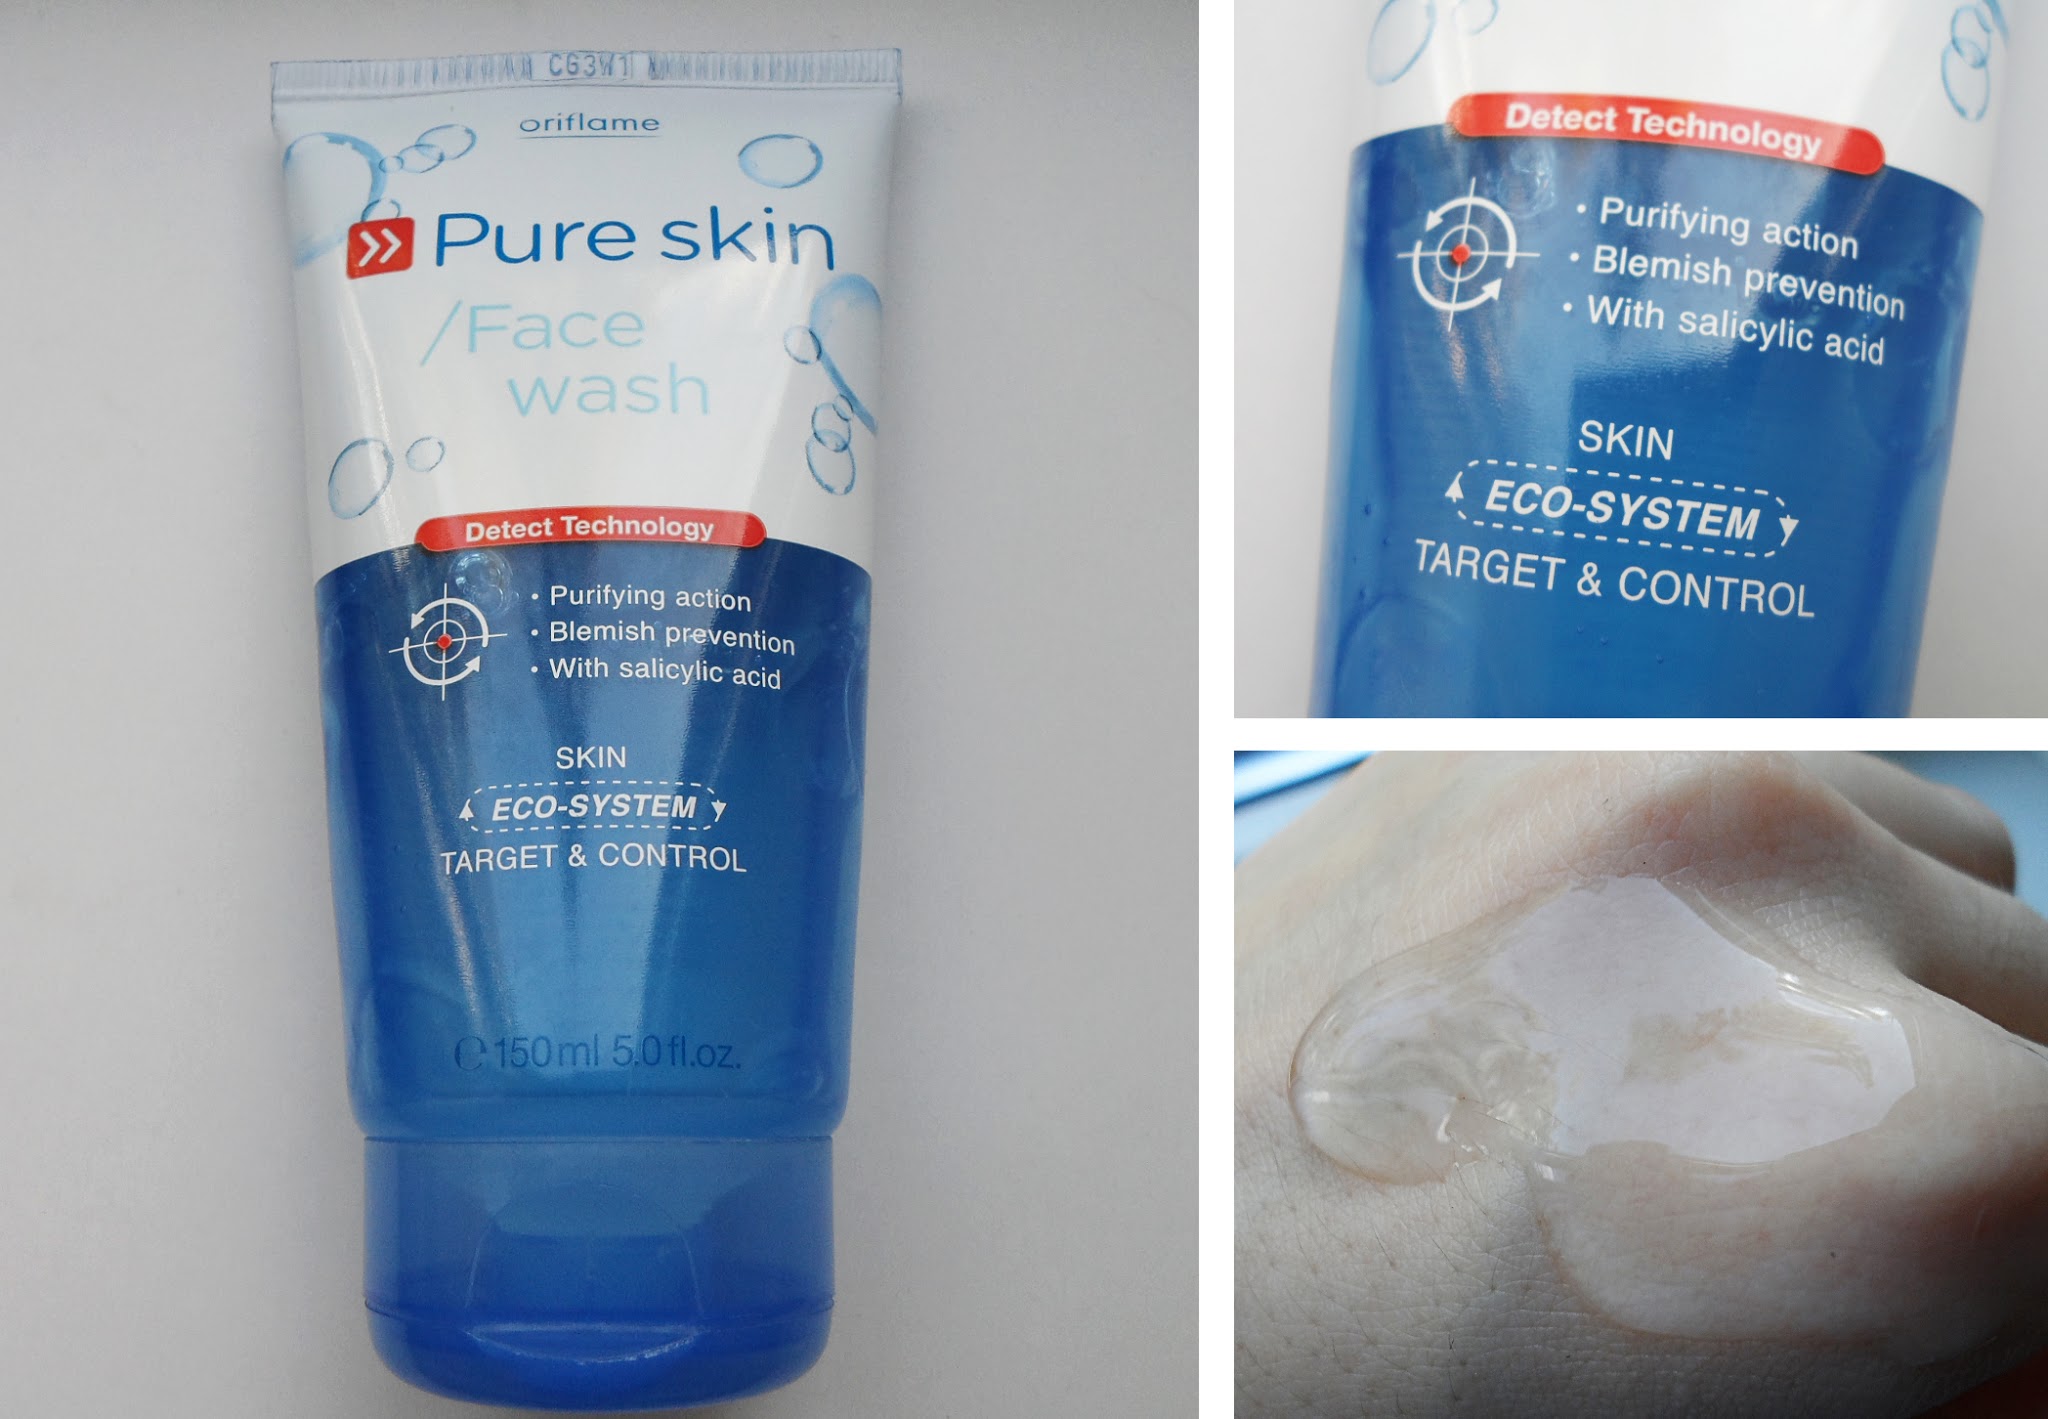 pure skin face wash gel by oriflame review